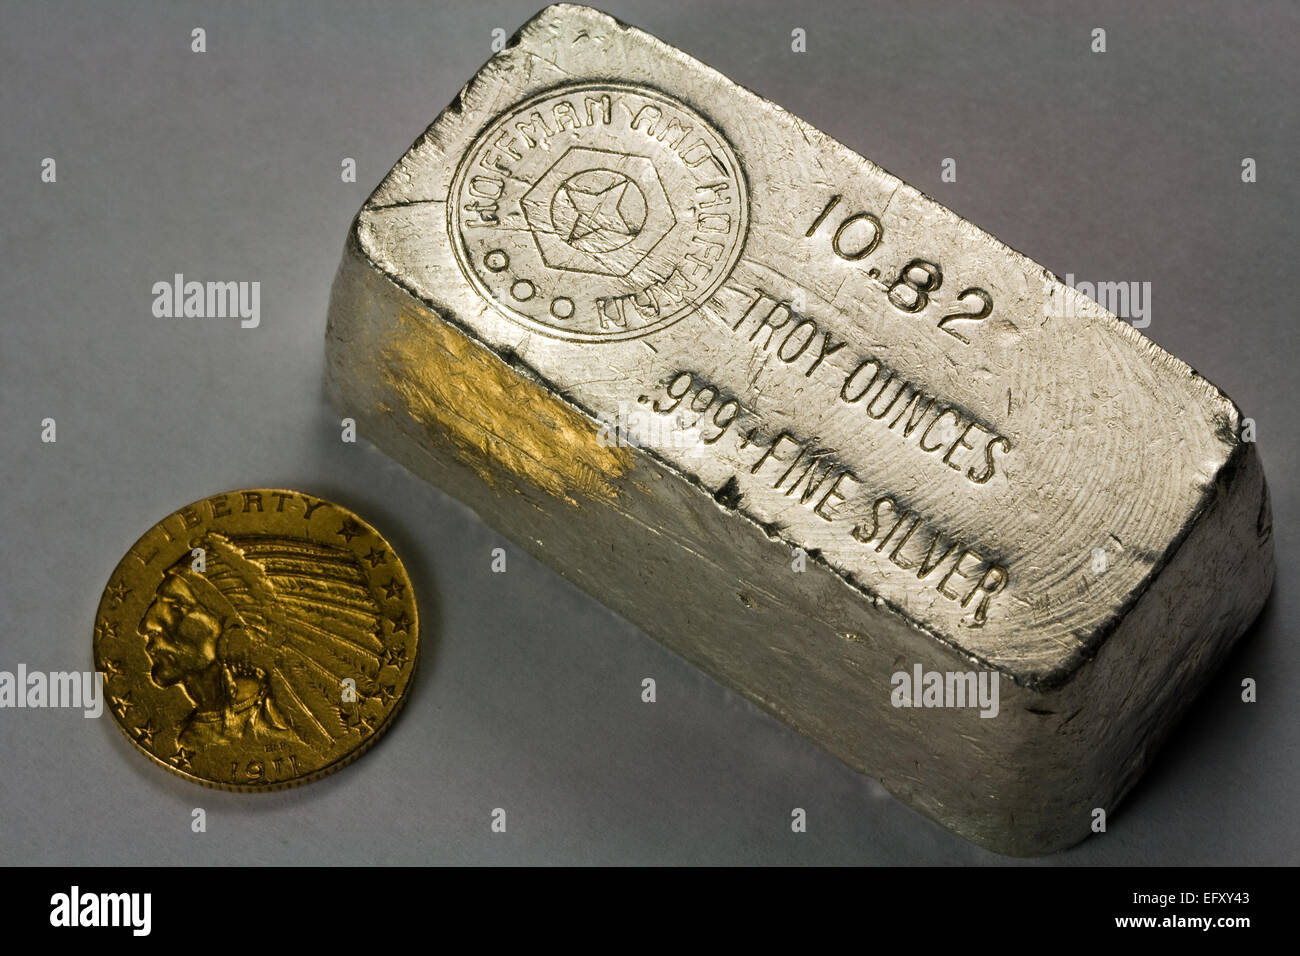 Old Poured and Stamped Silver Bullion Bar and 1911 Five Dollar United States Gold Coin Stock Photo